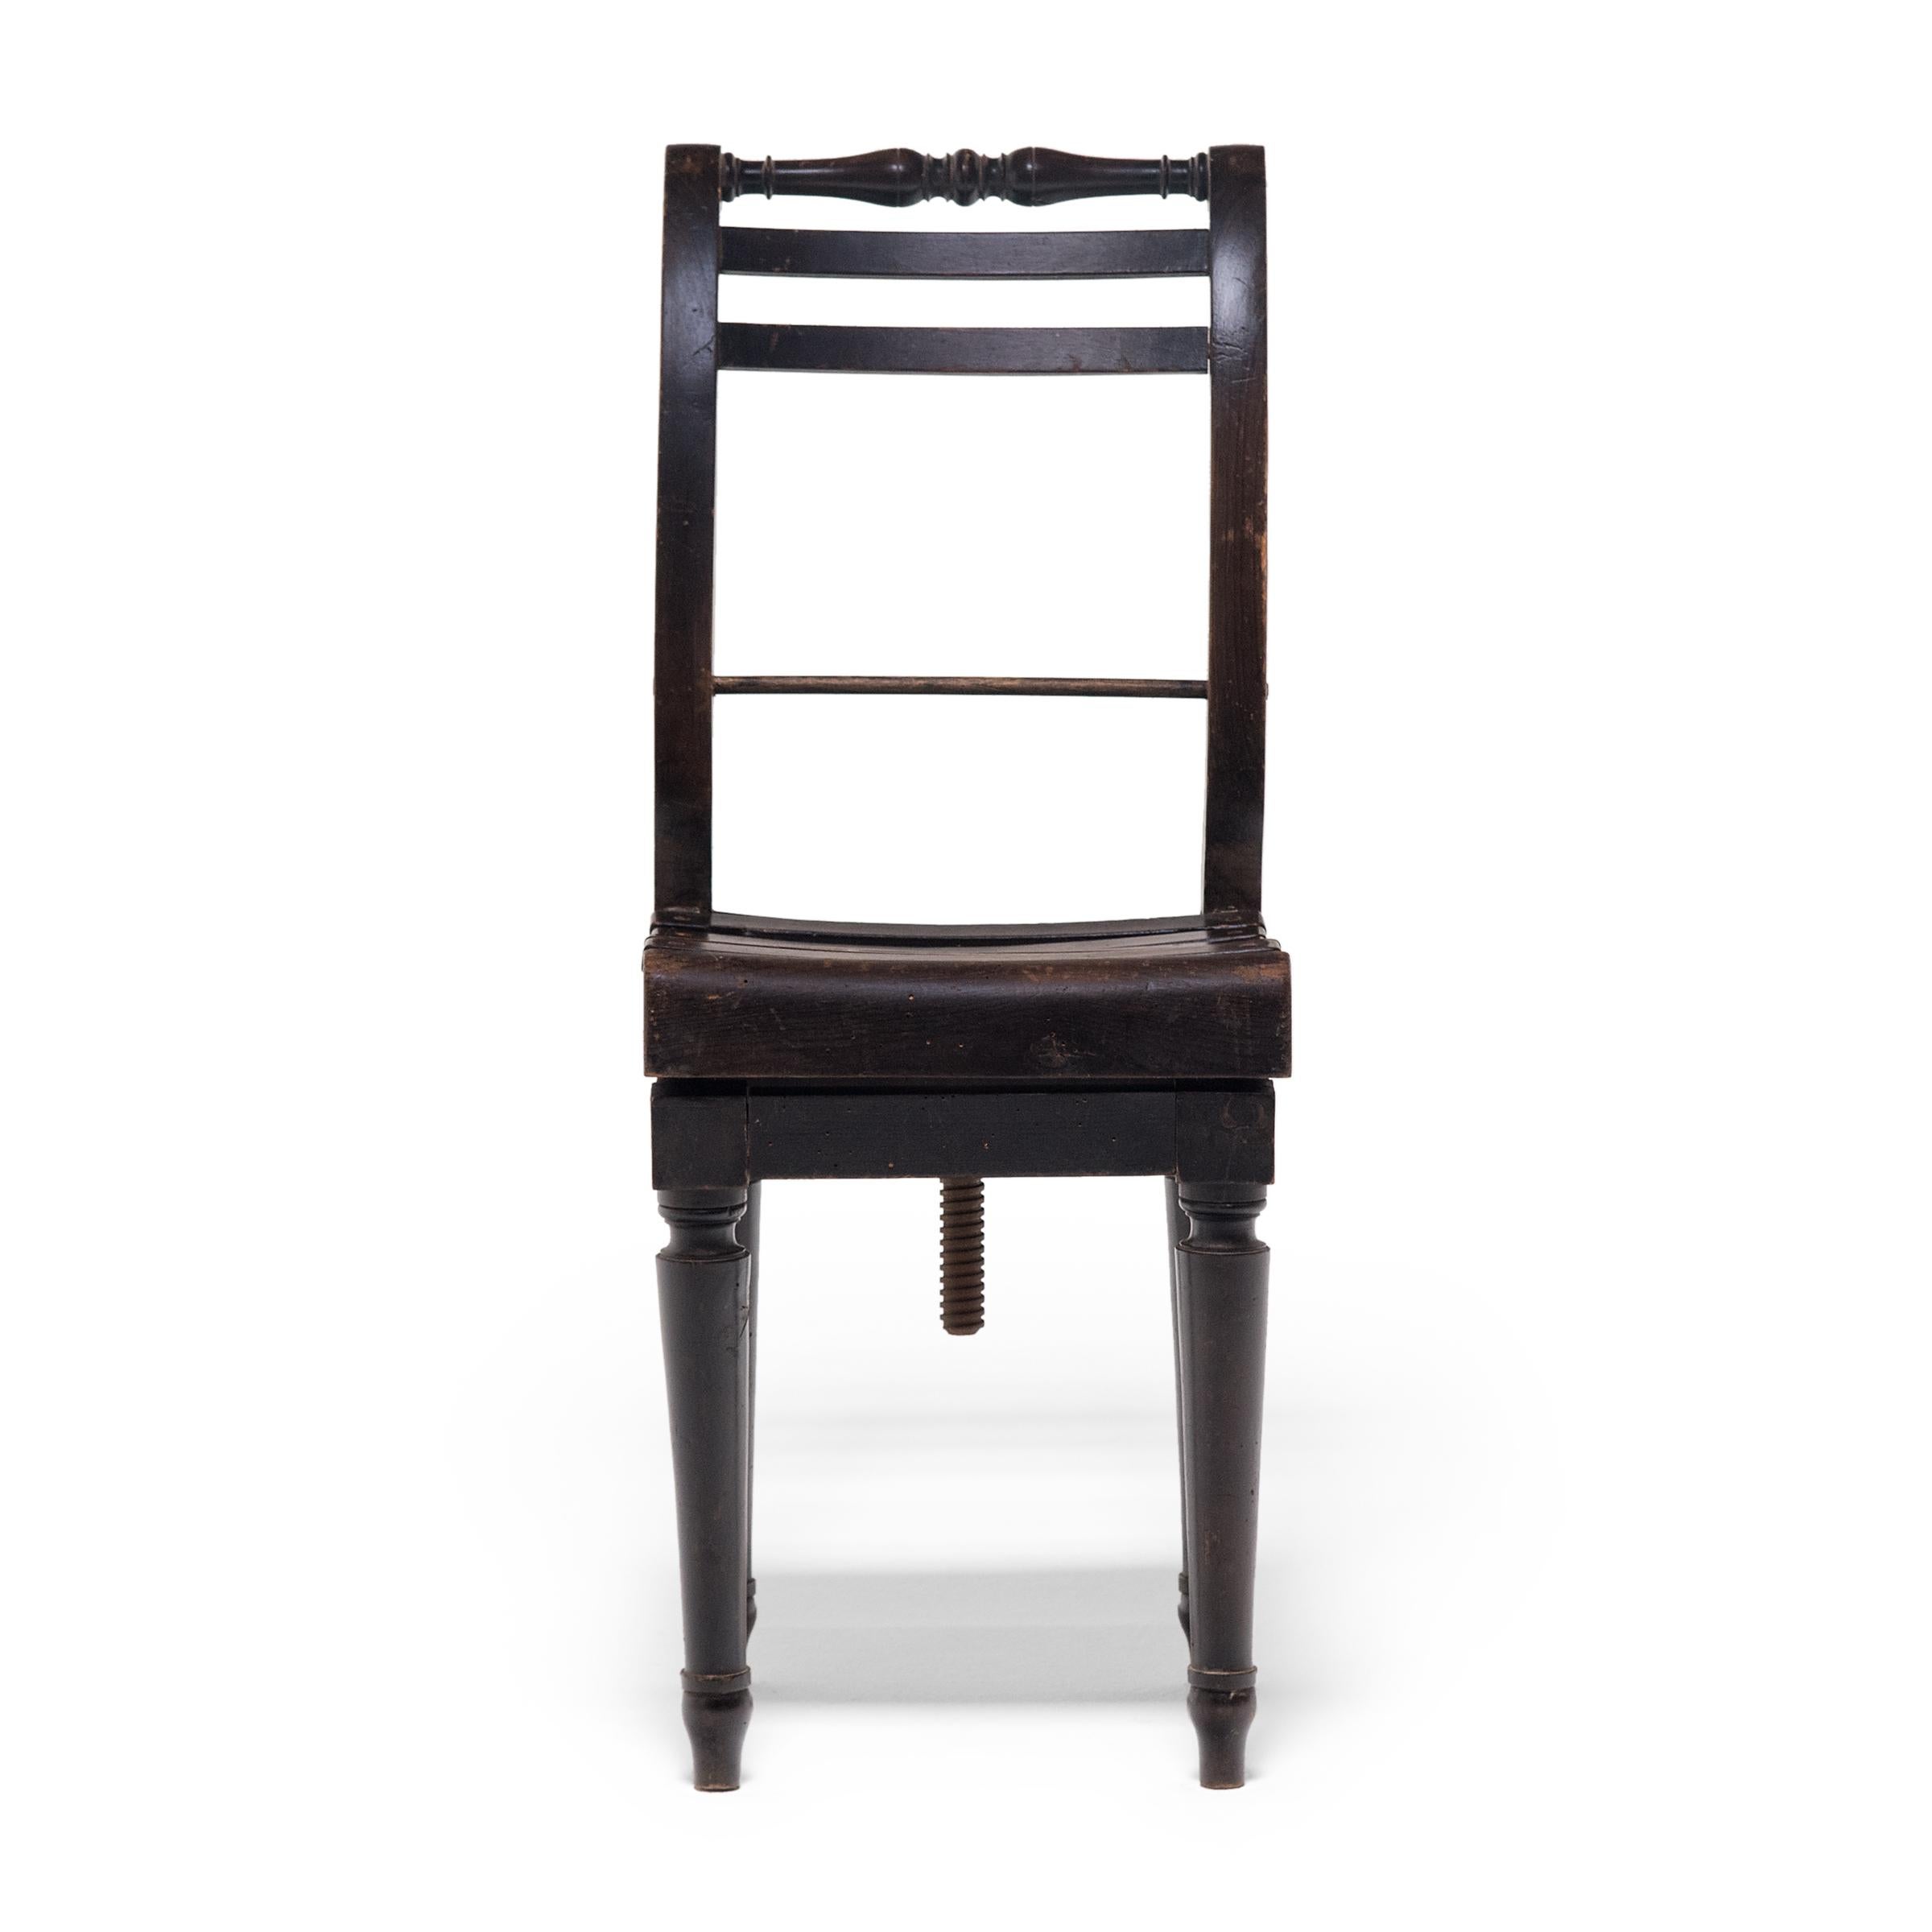 20th Century Chinese Slatted Turn Chair, C. 1900 For Sale